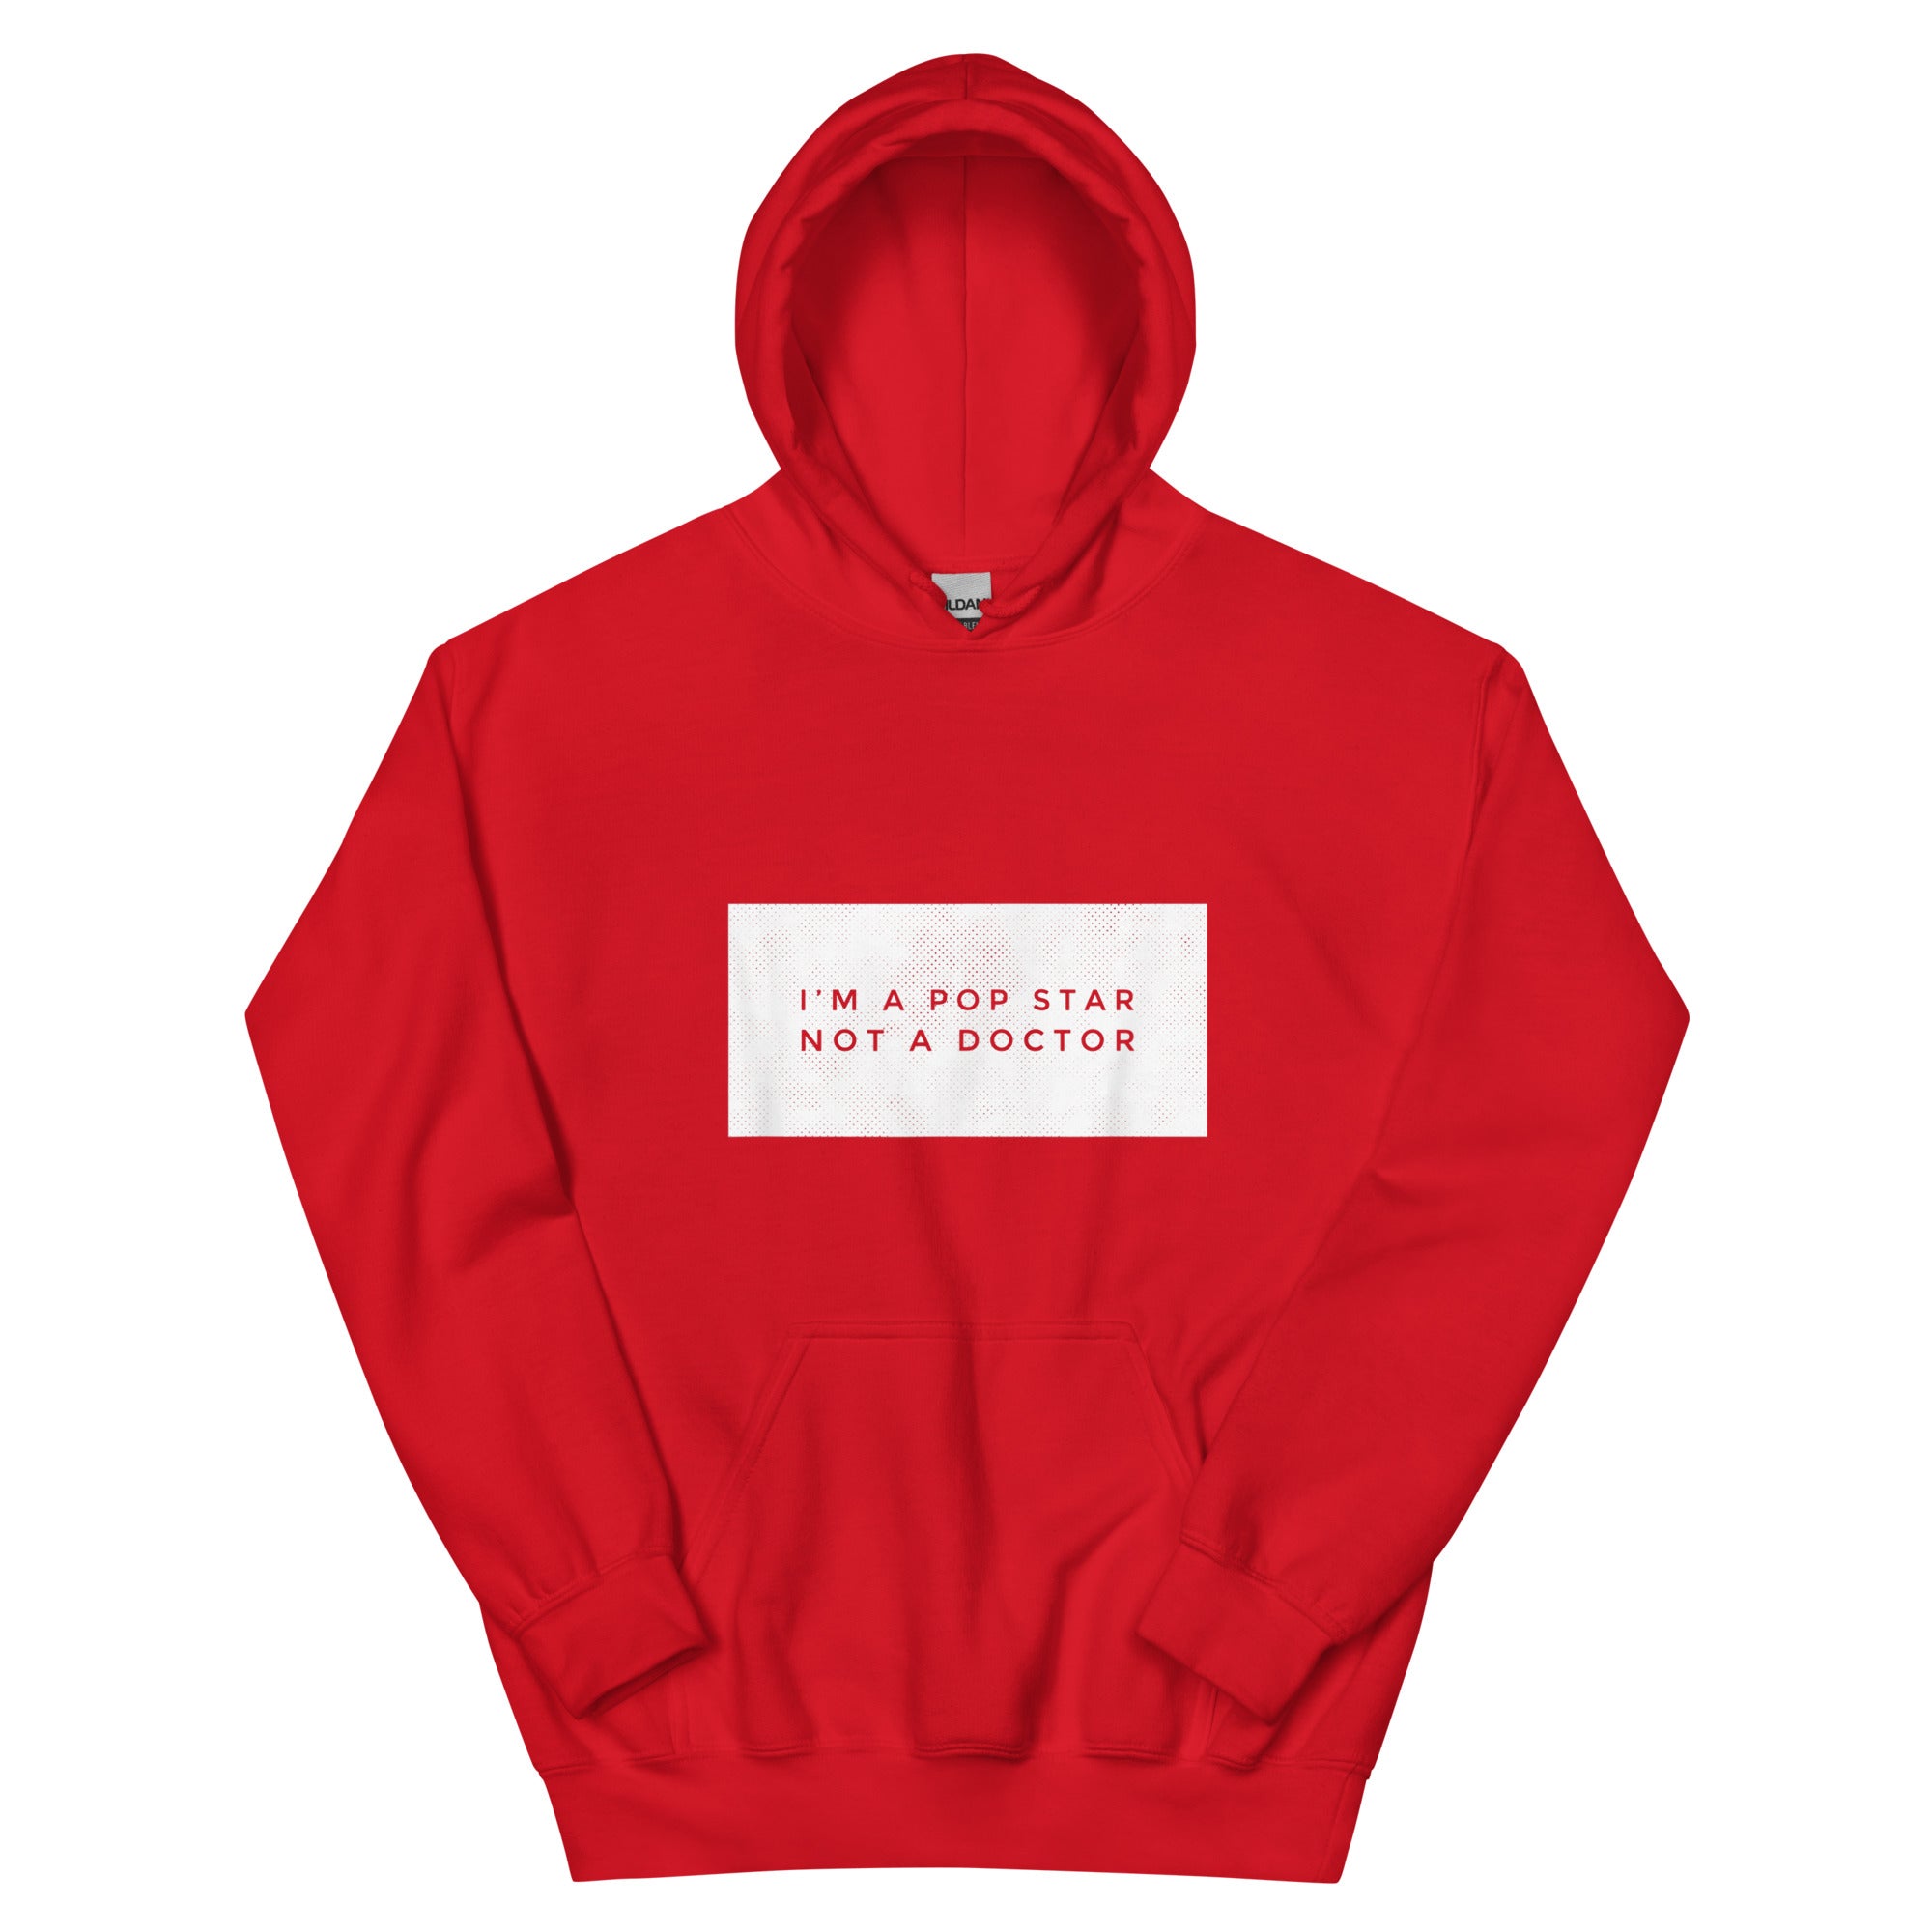 I'M A POP STAR NOT A DOCTOR Unisex Hoodie - Hiphopya